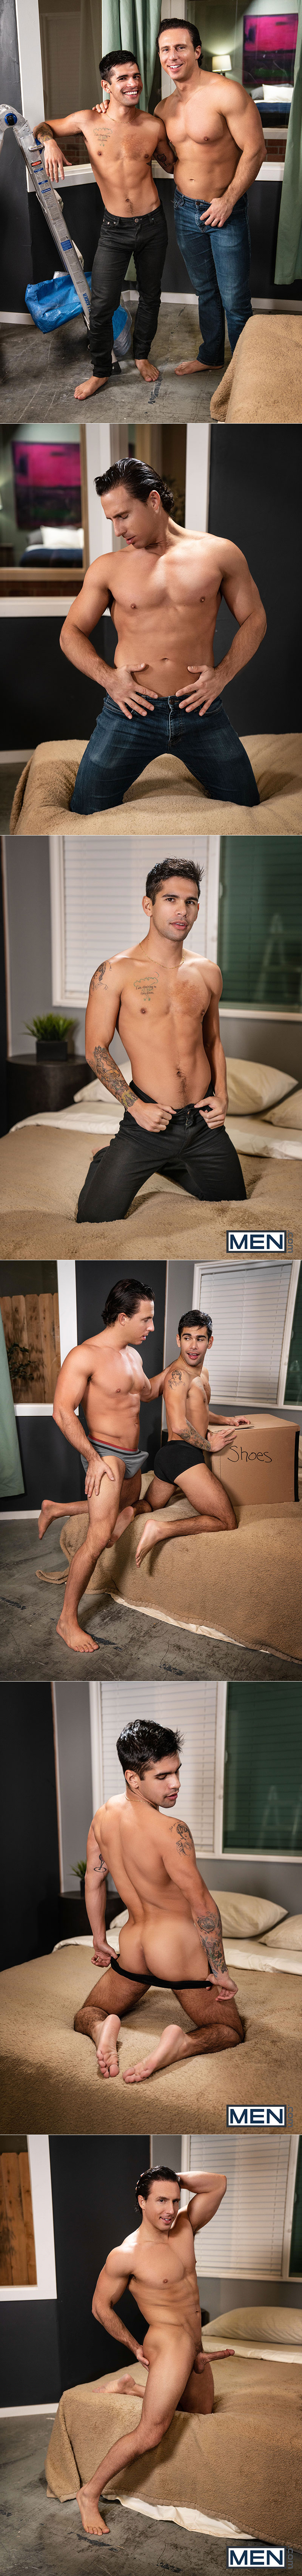 Men.com: Dante Colle watches Reese Rideout fucking Ty Mitchell bareback in "Gaybors, Part 1"